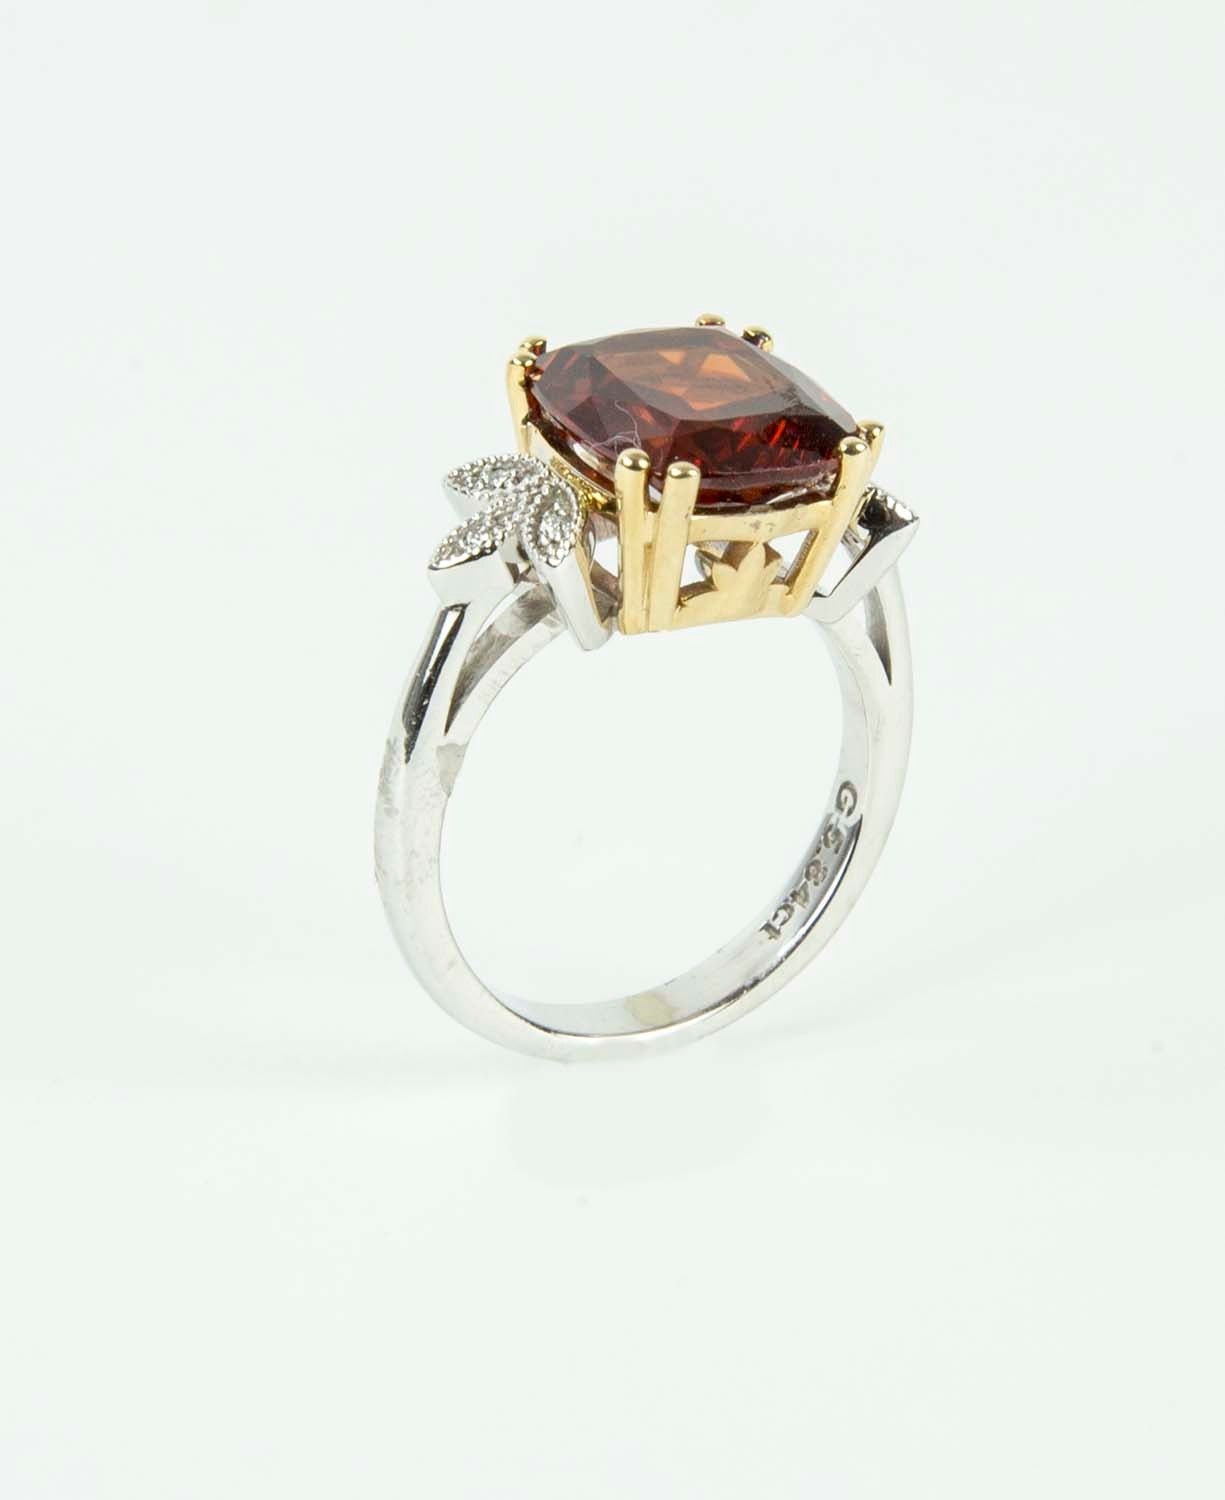 Centering a Beautiful 5.84ct Cushion-cut Spessartite Garnet flanked by six round brilliant cut diamonds, one on either side; approx .05tctw; hand crafted in 14k two tone white and yellow gold mounting; Ring size: 6.75. *Complimentary ring sizing